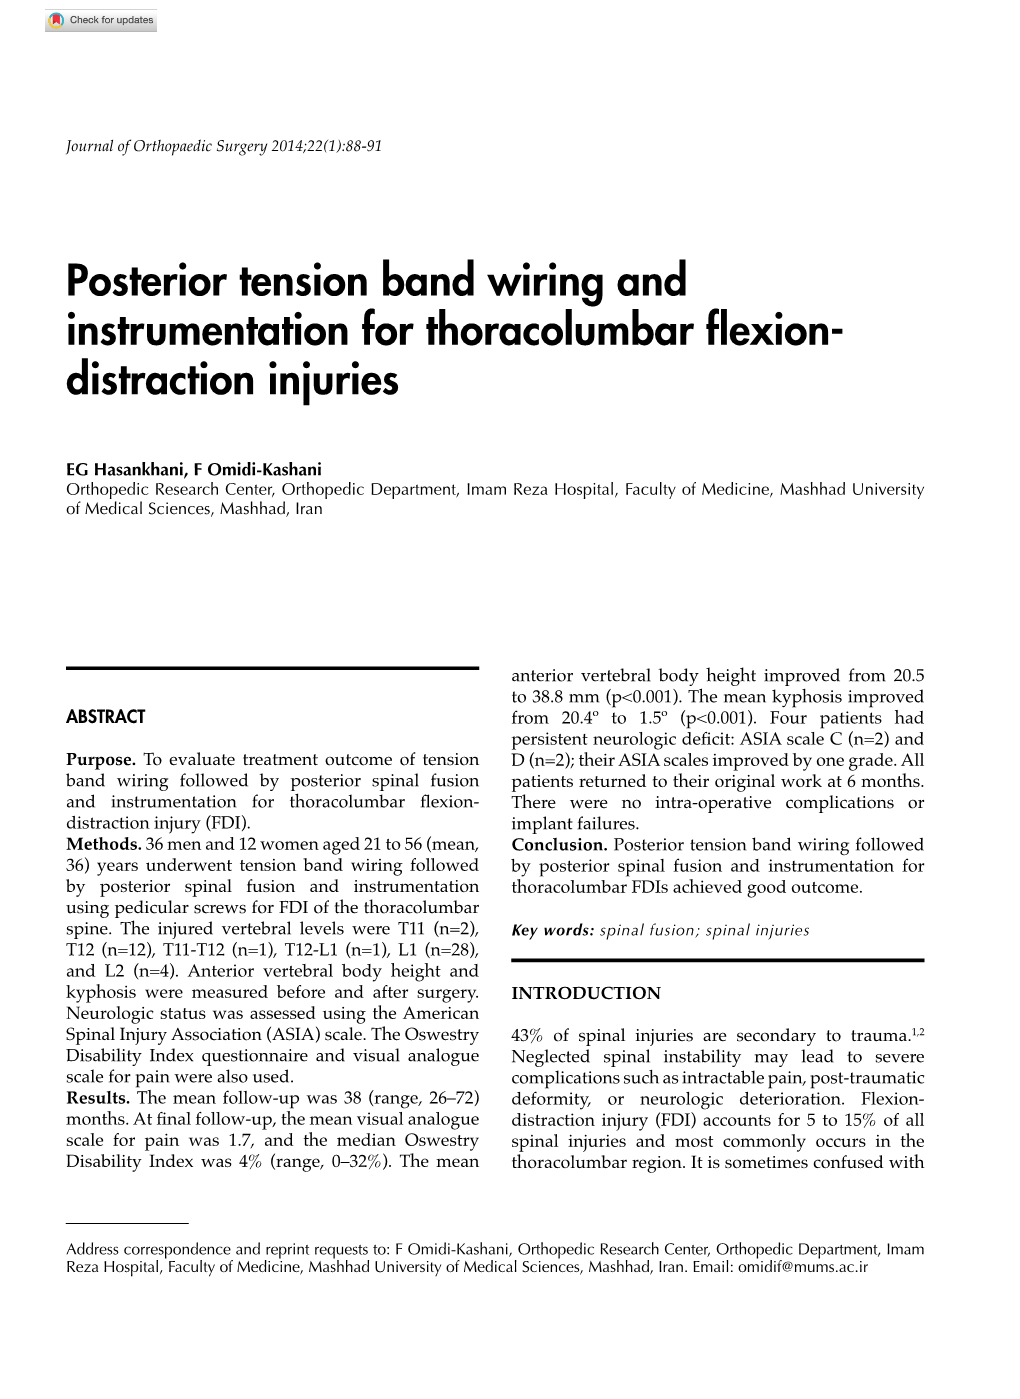 Posterior Tension Band Wiring and Instrumentation for Thoracolumbar Flexion- Distraction Injuries